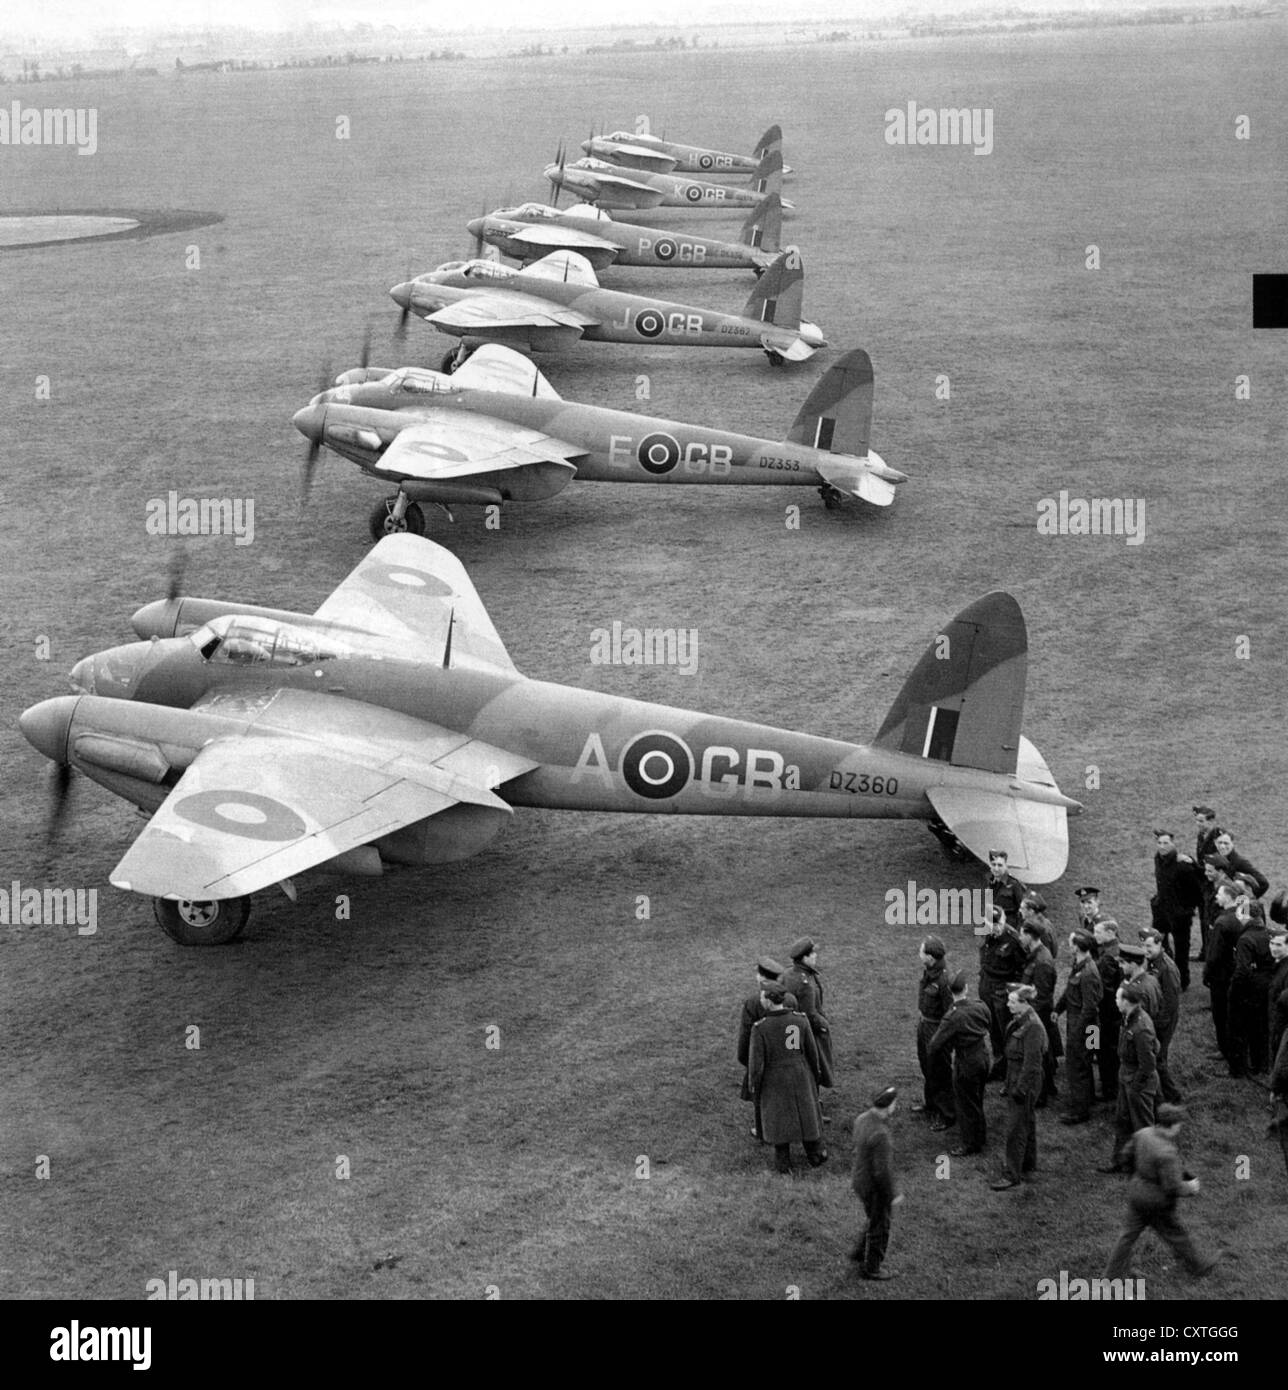 DE HAVILLAND MOSQUITO  No 105 Squadron RAF with their B.IV Series 2 bomber Mosquito aircraft  at Horsham St Faith in  May 1942 Stock Photo